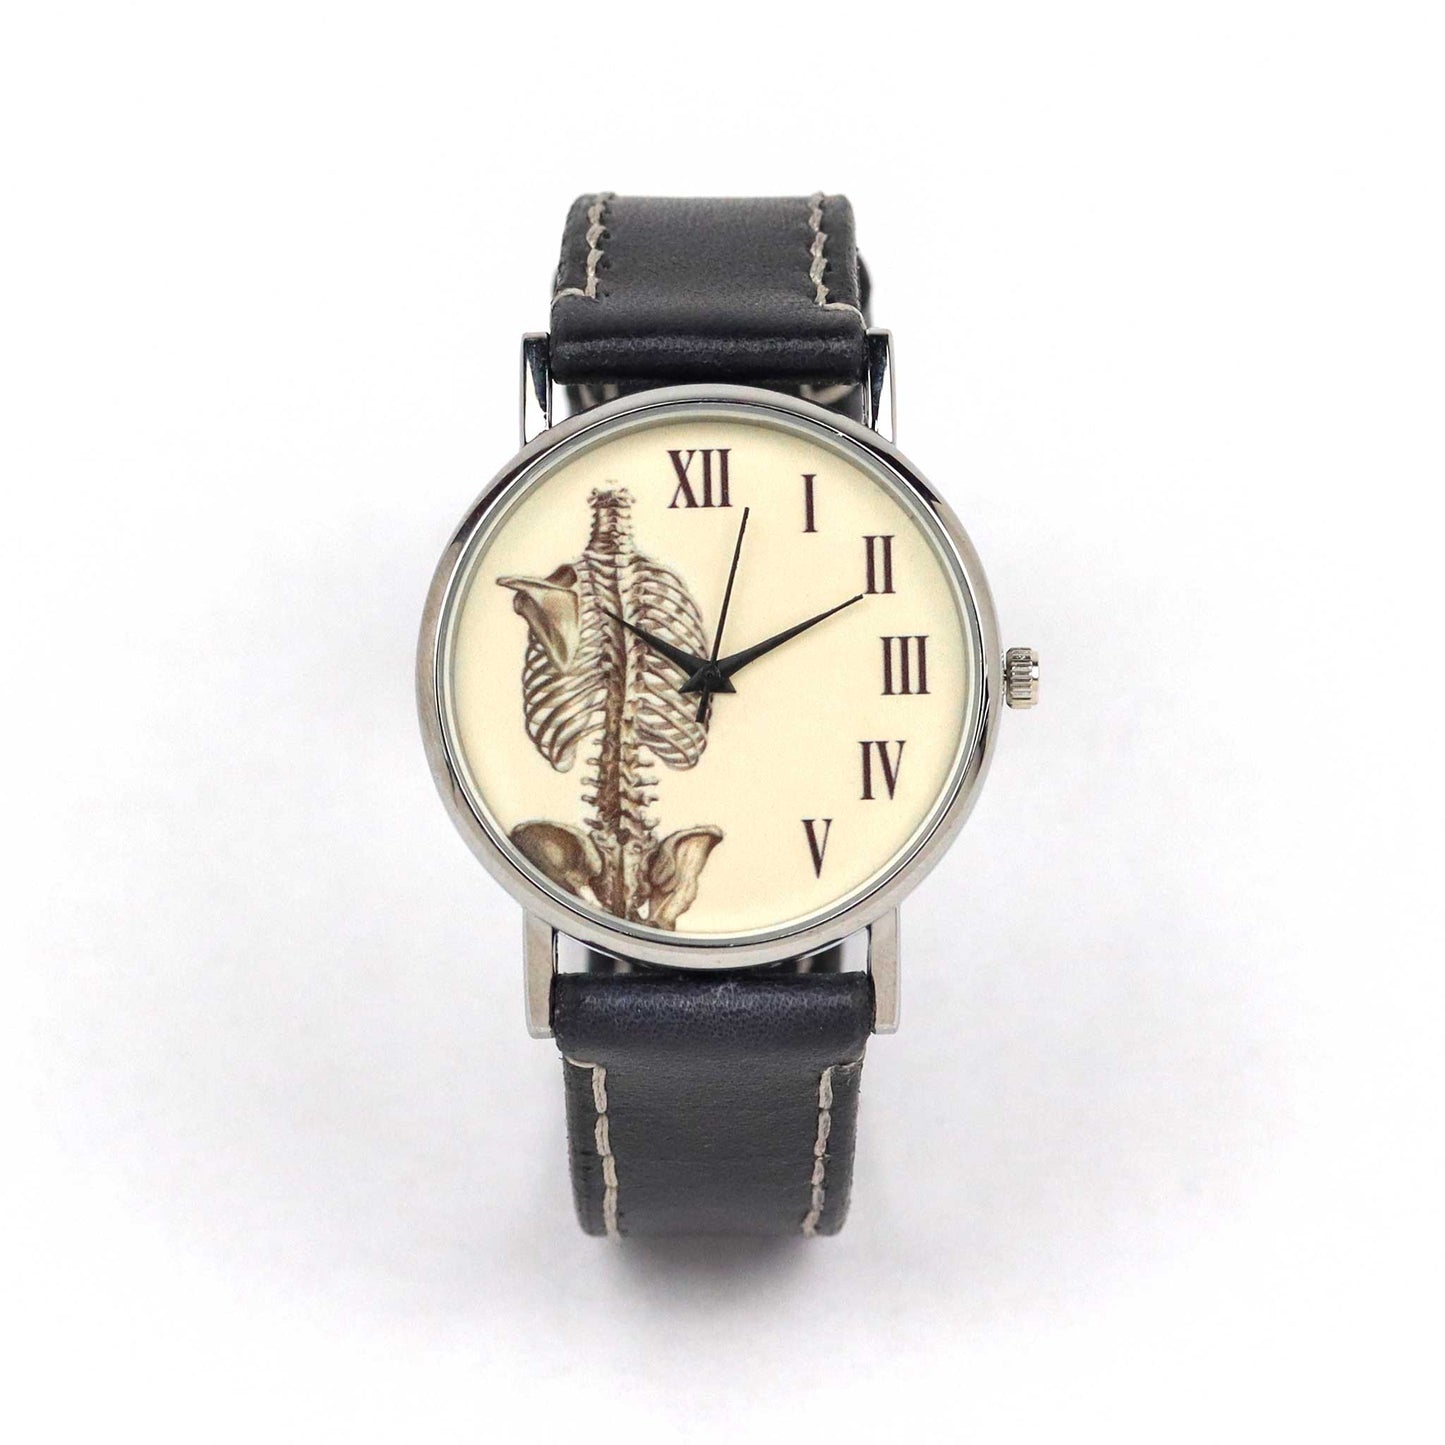 black strap wrist watch with skeletal system dial